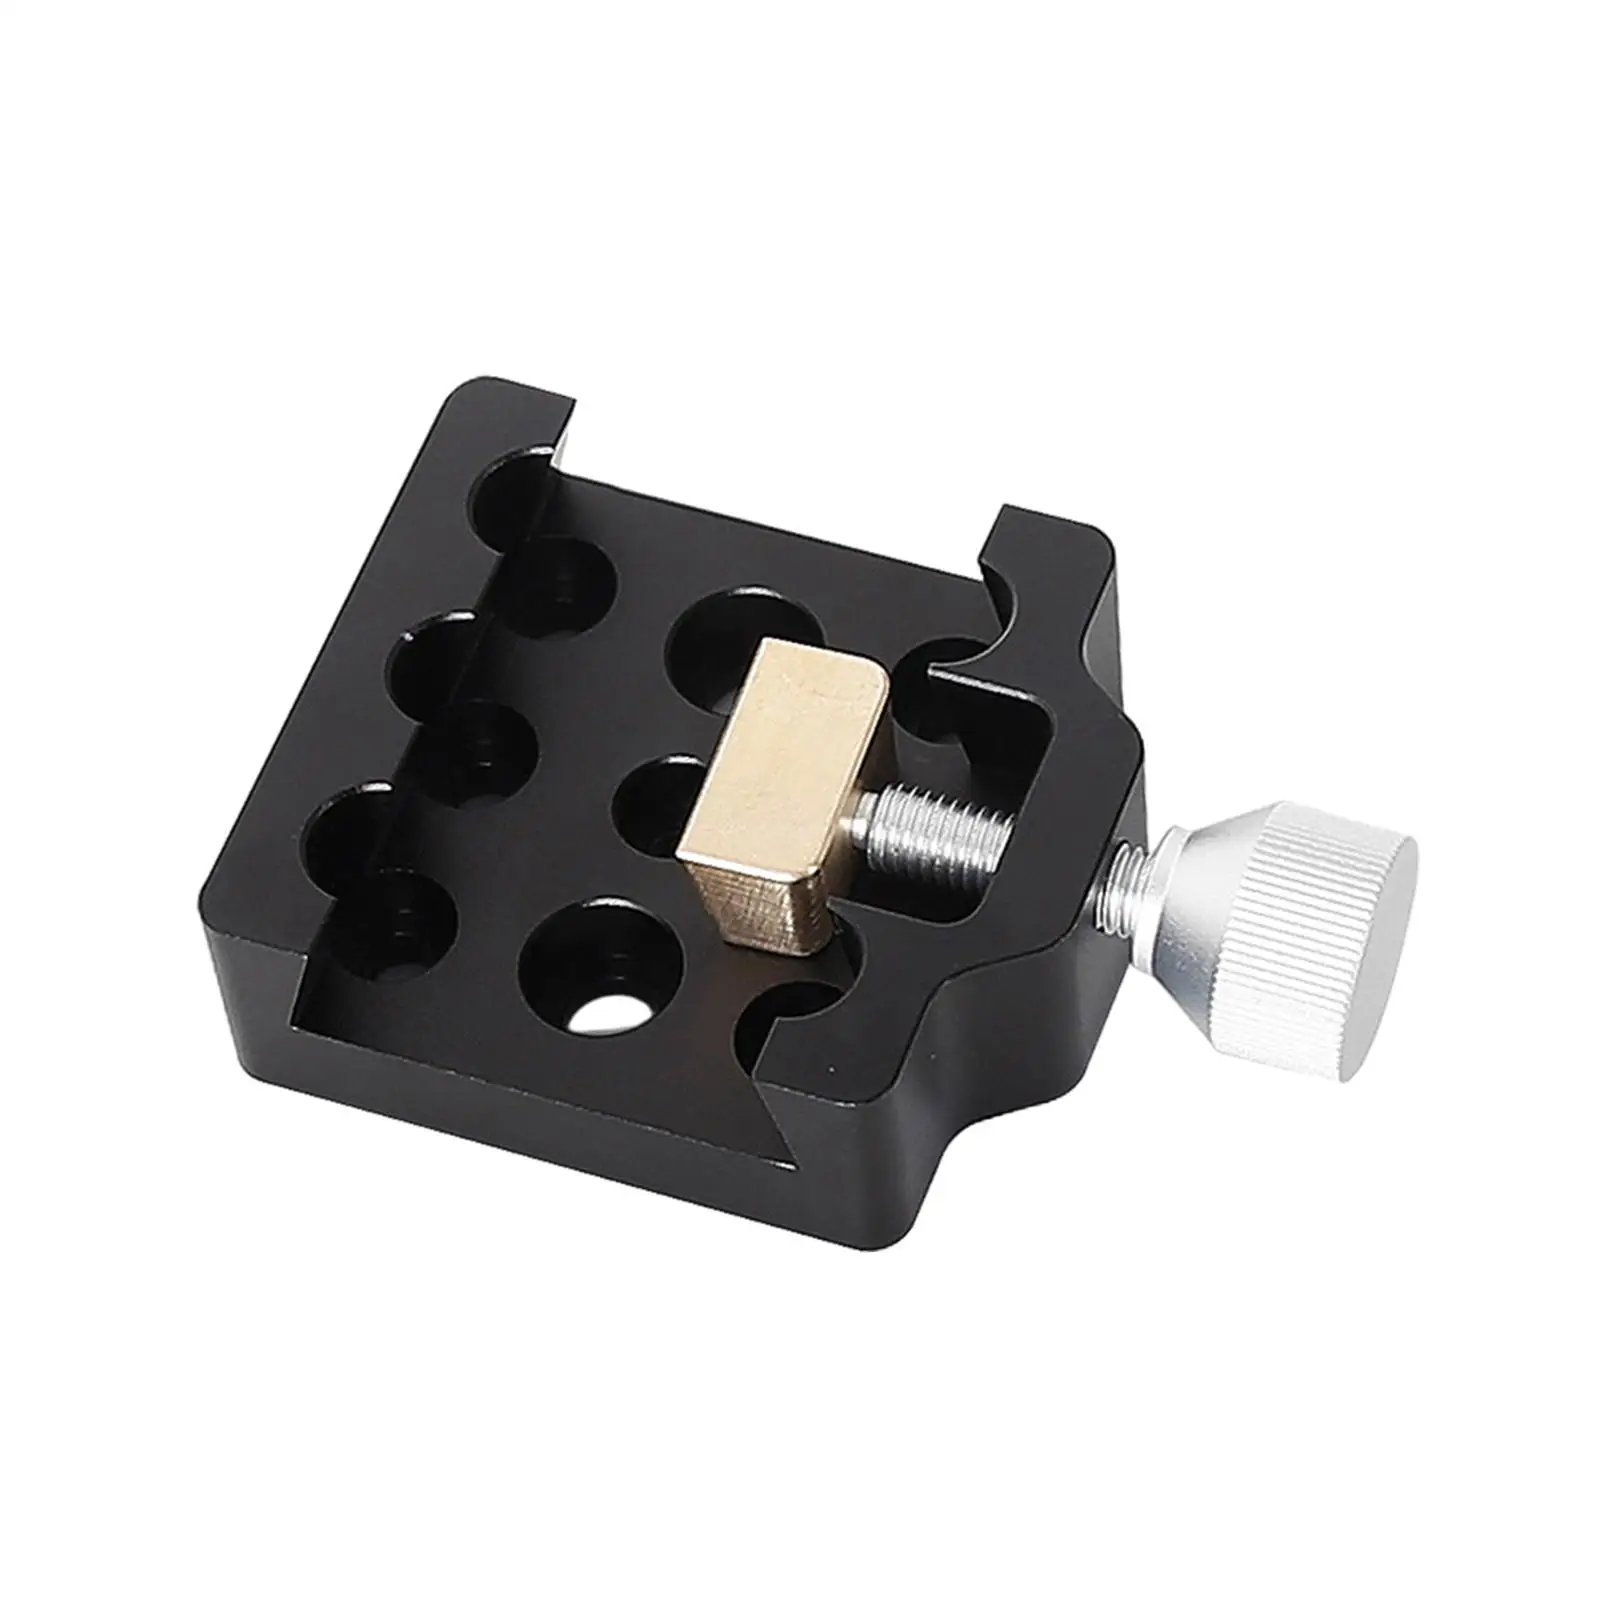 Telescope Adapter Mount Base Portable Accessories for Telescopes and Cameras